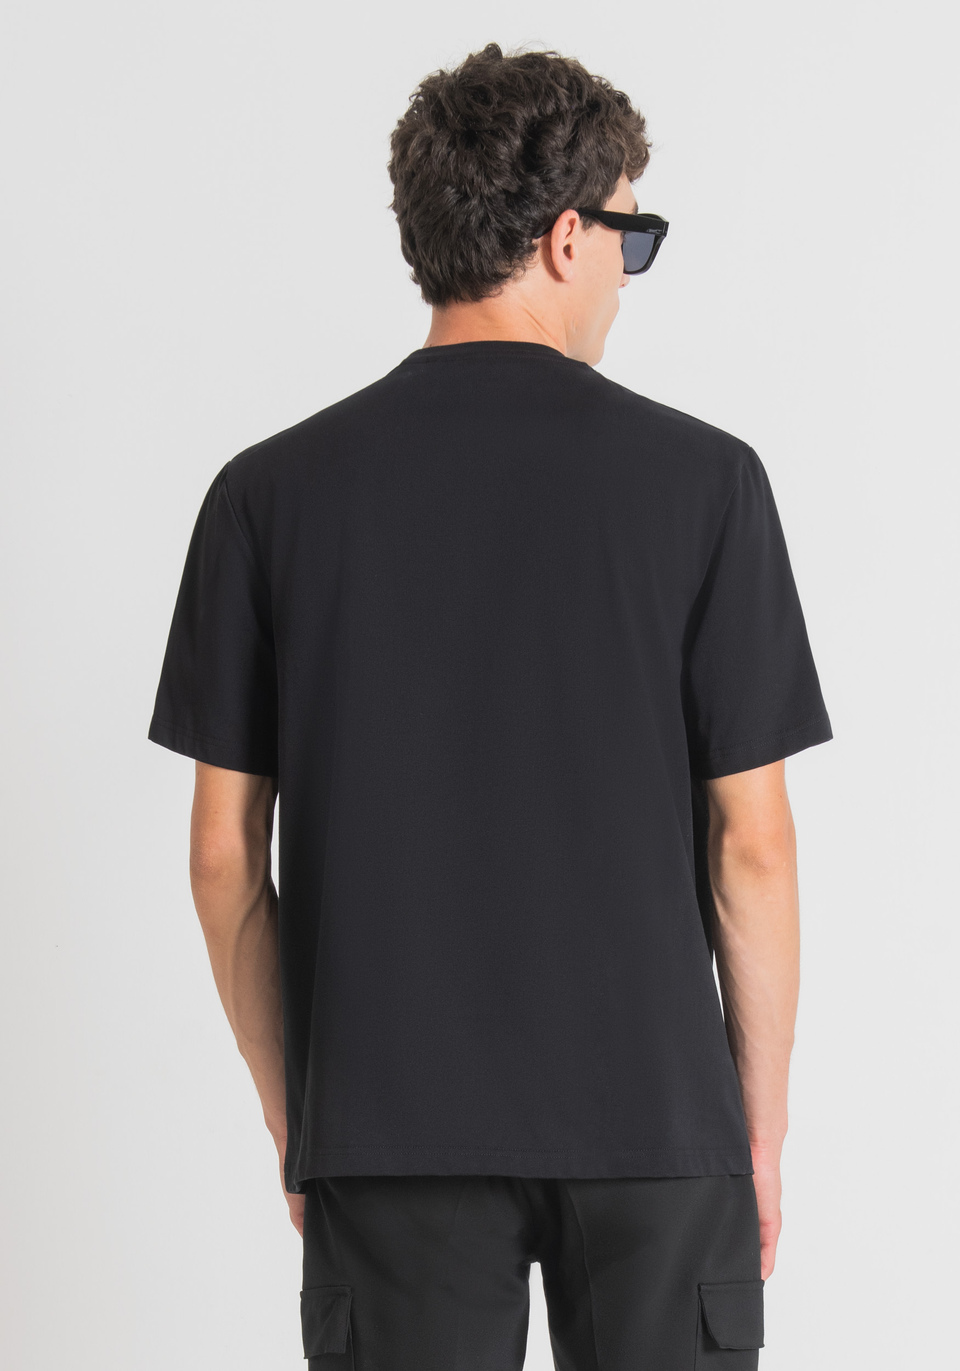 OVERSIZED T-SHIRT IN PURE COTTON WITH HEART SIDE POCKET - Antony Morato Online Shop